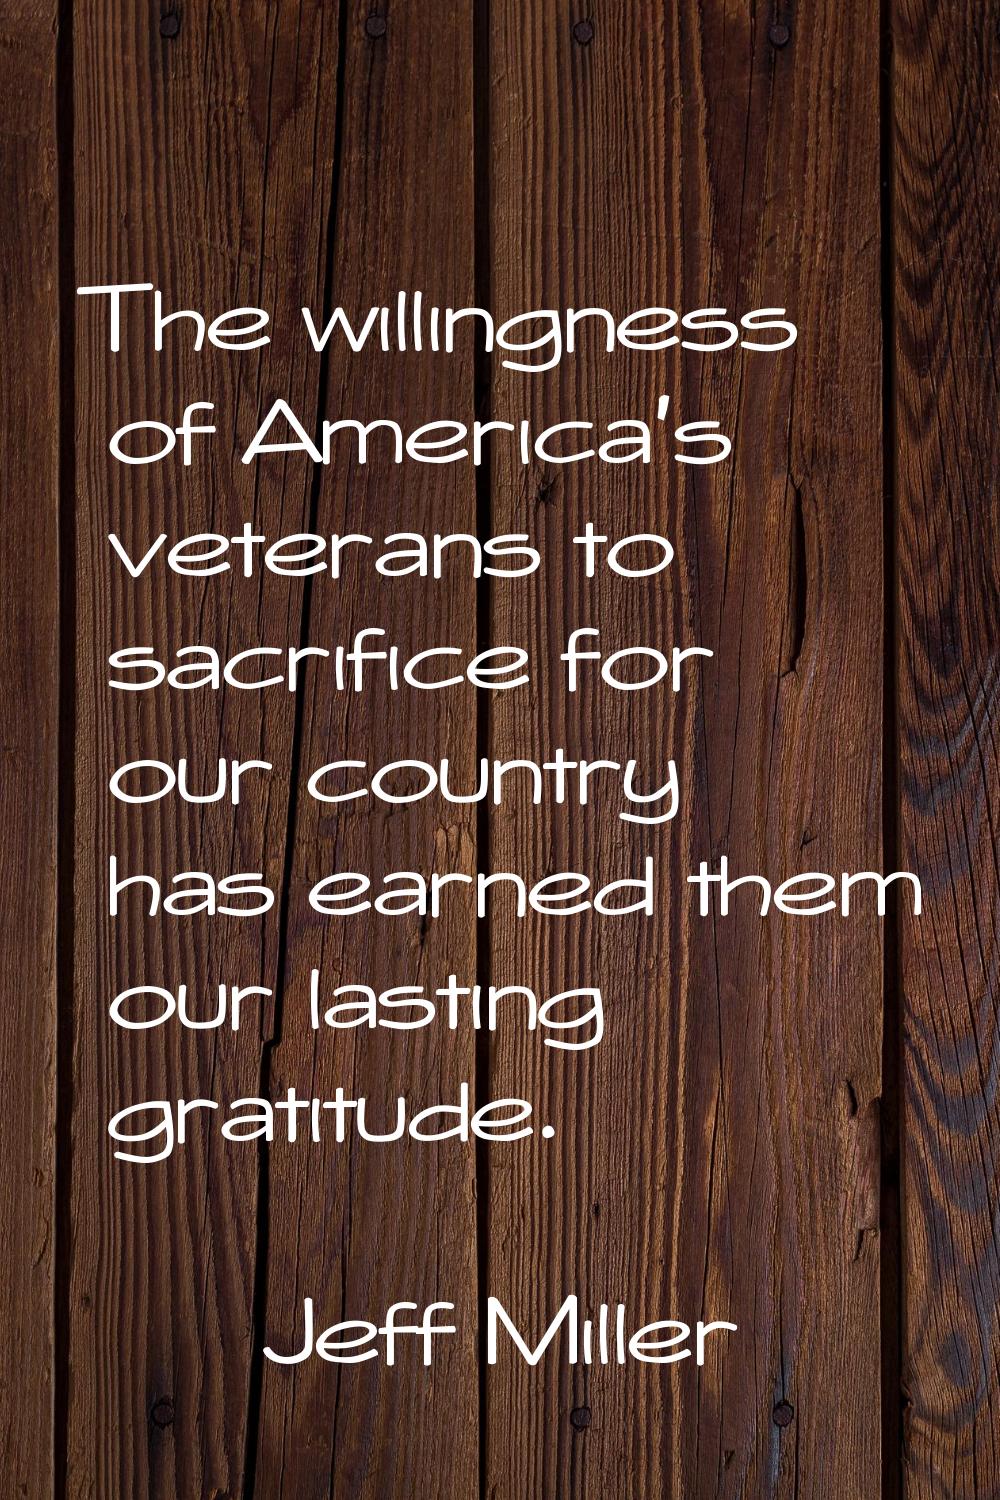 The willingness of America's veterans to sacrifice for our country has earned them our lasting grat